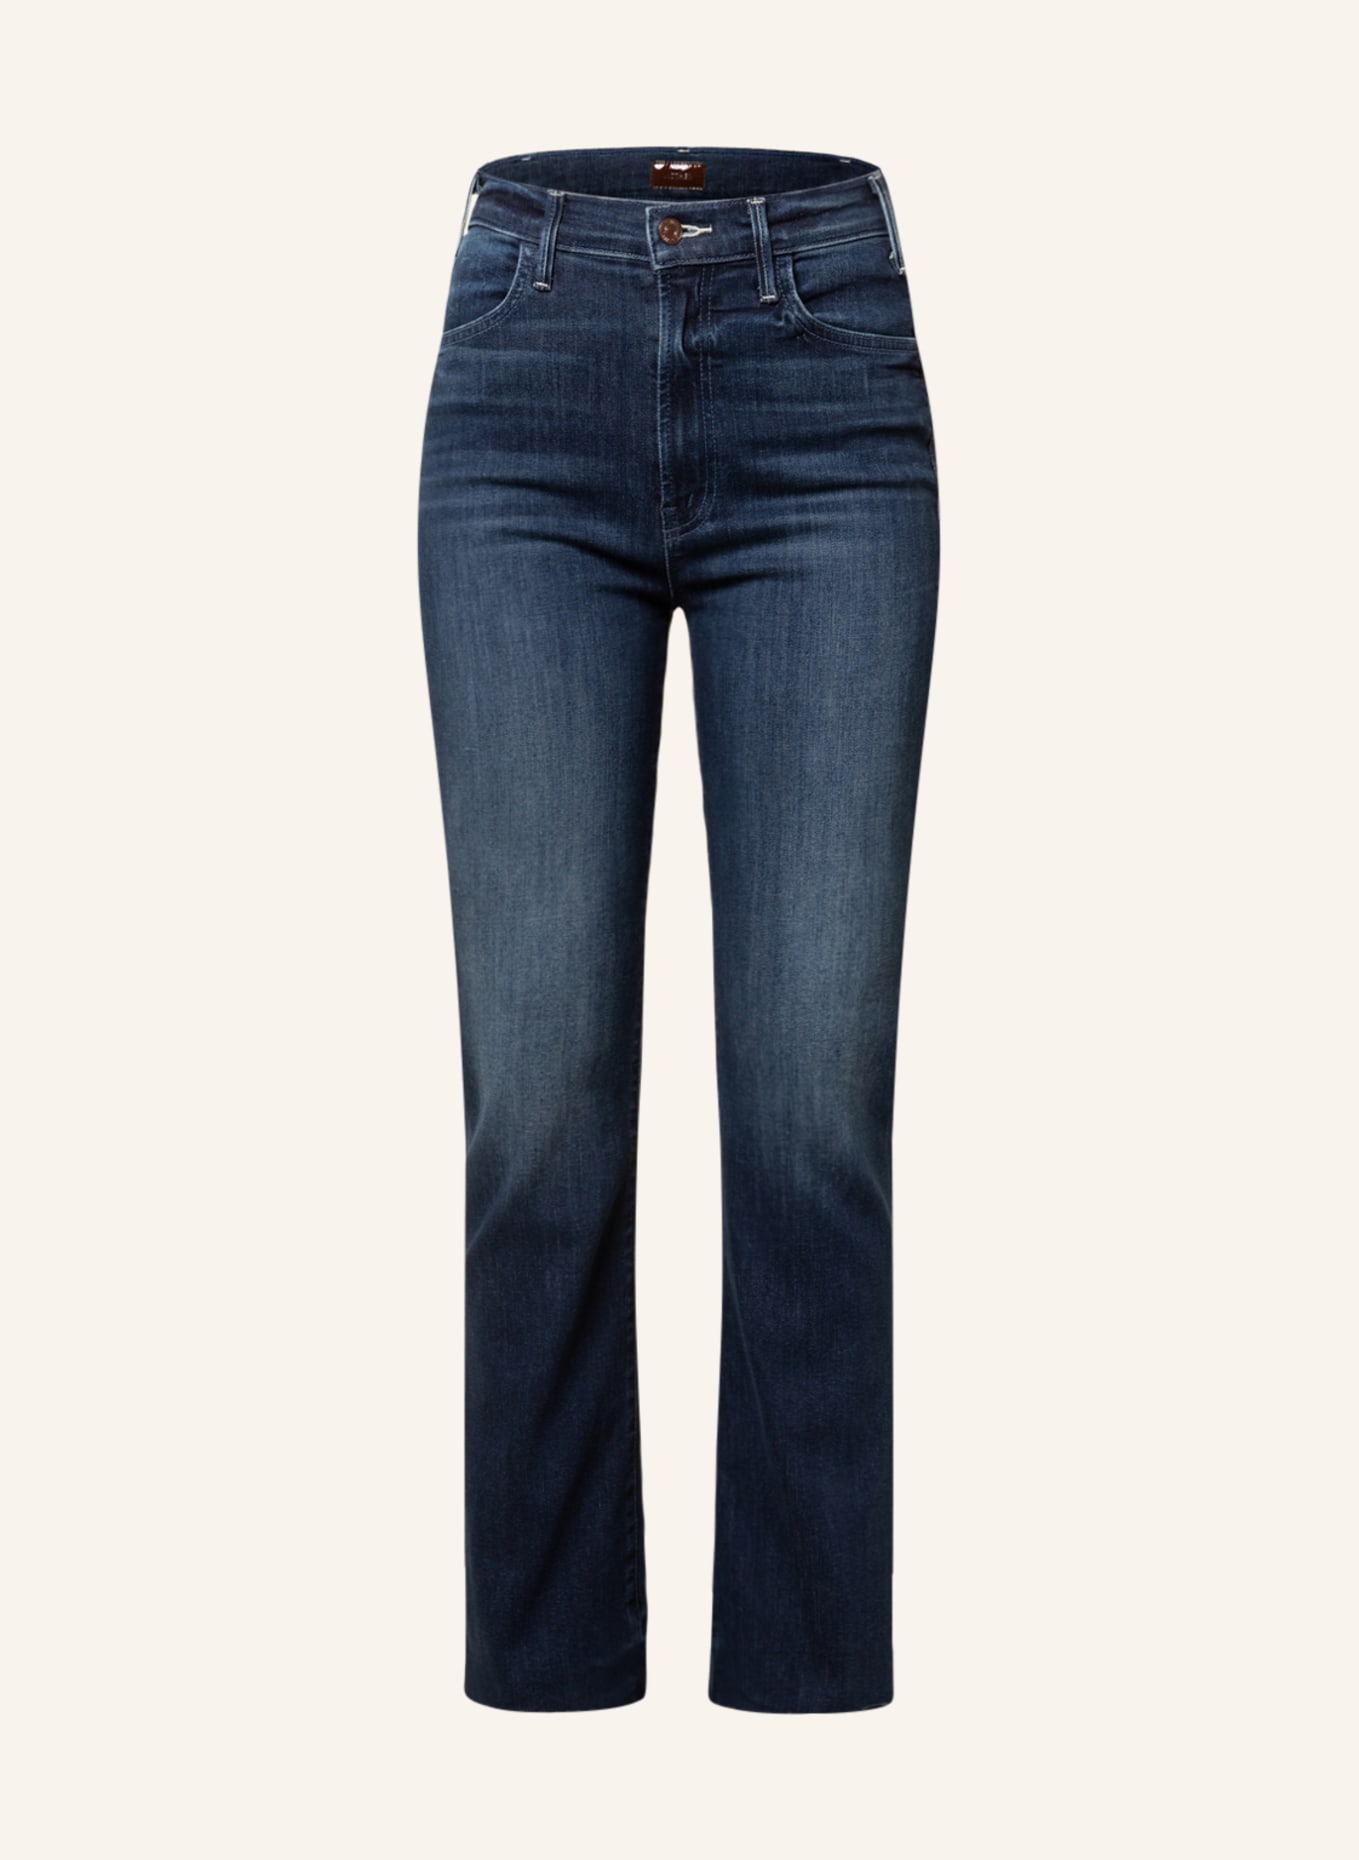 MOTHER Bootcut Jeans THE HUSTLER ANKLE FRAY, Farbe: BLAU (Bild 1)